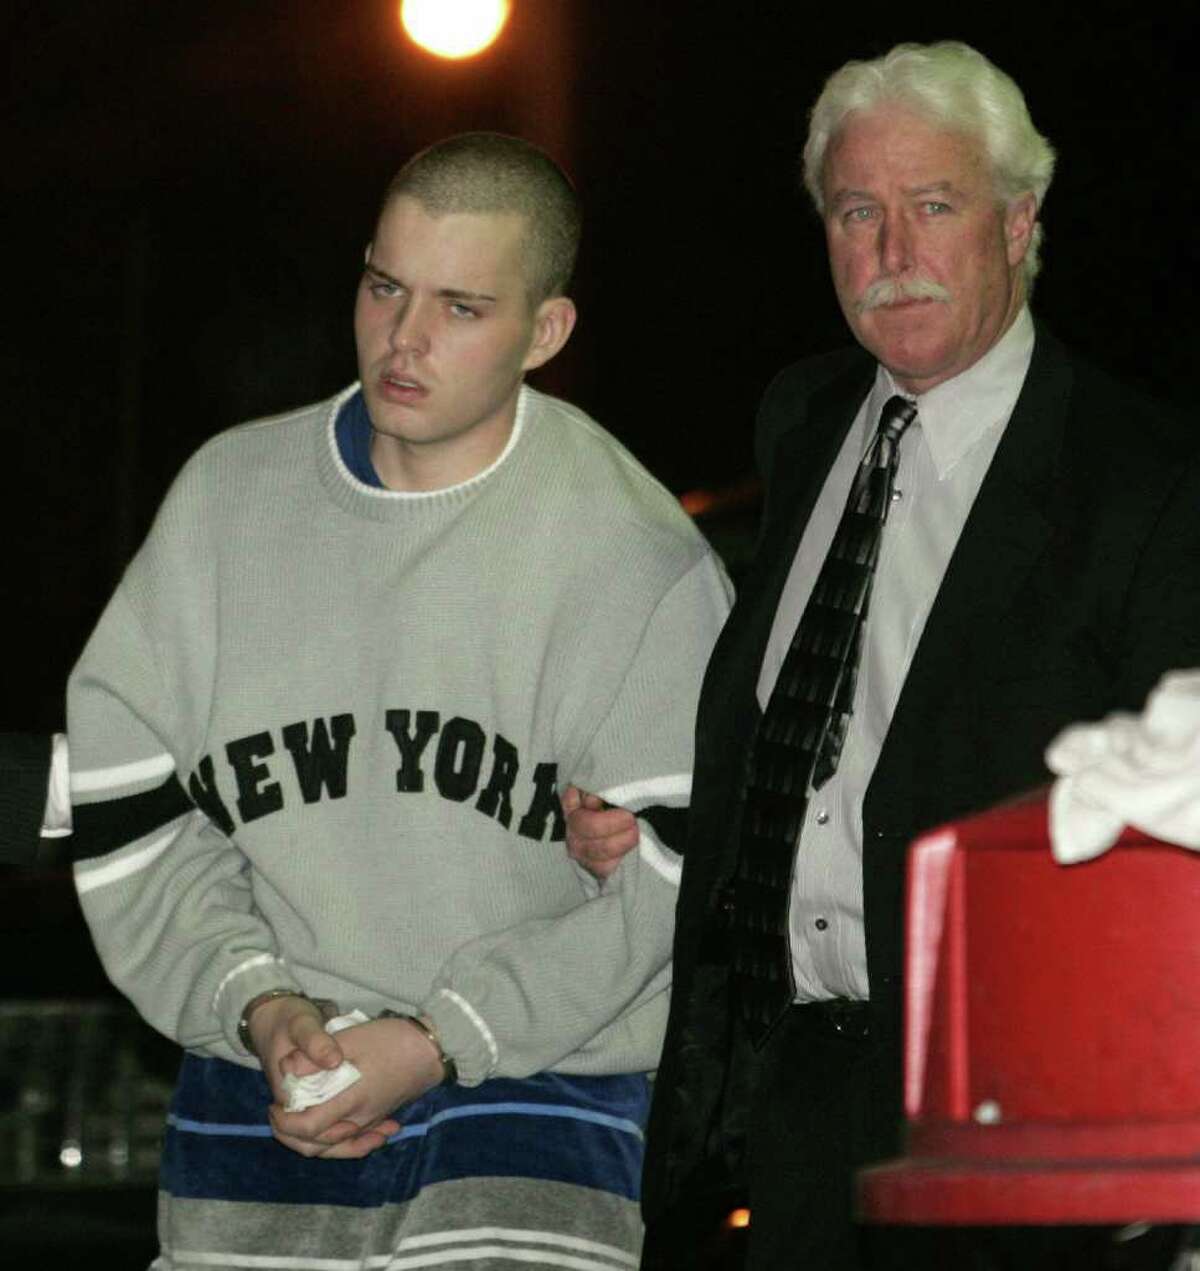 Christopher DiMeo, left, is escorted by a Nassau County homicide detective into police headquarters in Mineola, N.Y., Tuesday, Feb. 8, 2005. DiMeo, an ex-convict suspected in a string of jewel heists that left three people dead in two states, was charged Tuesday with murder. (AP Photo/Ed Betz)